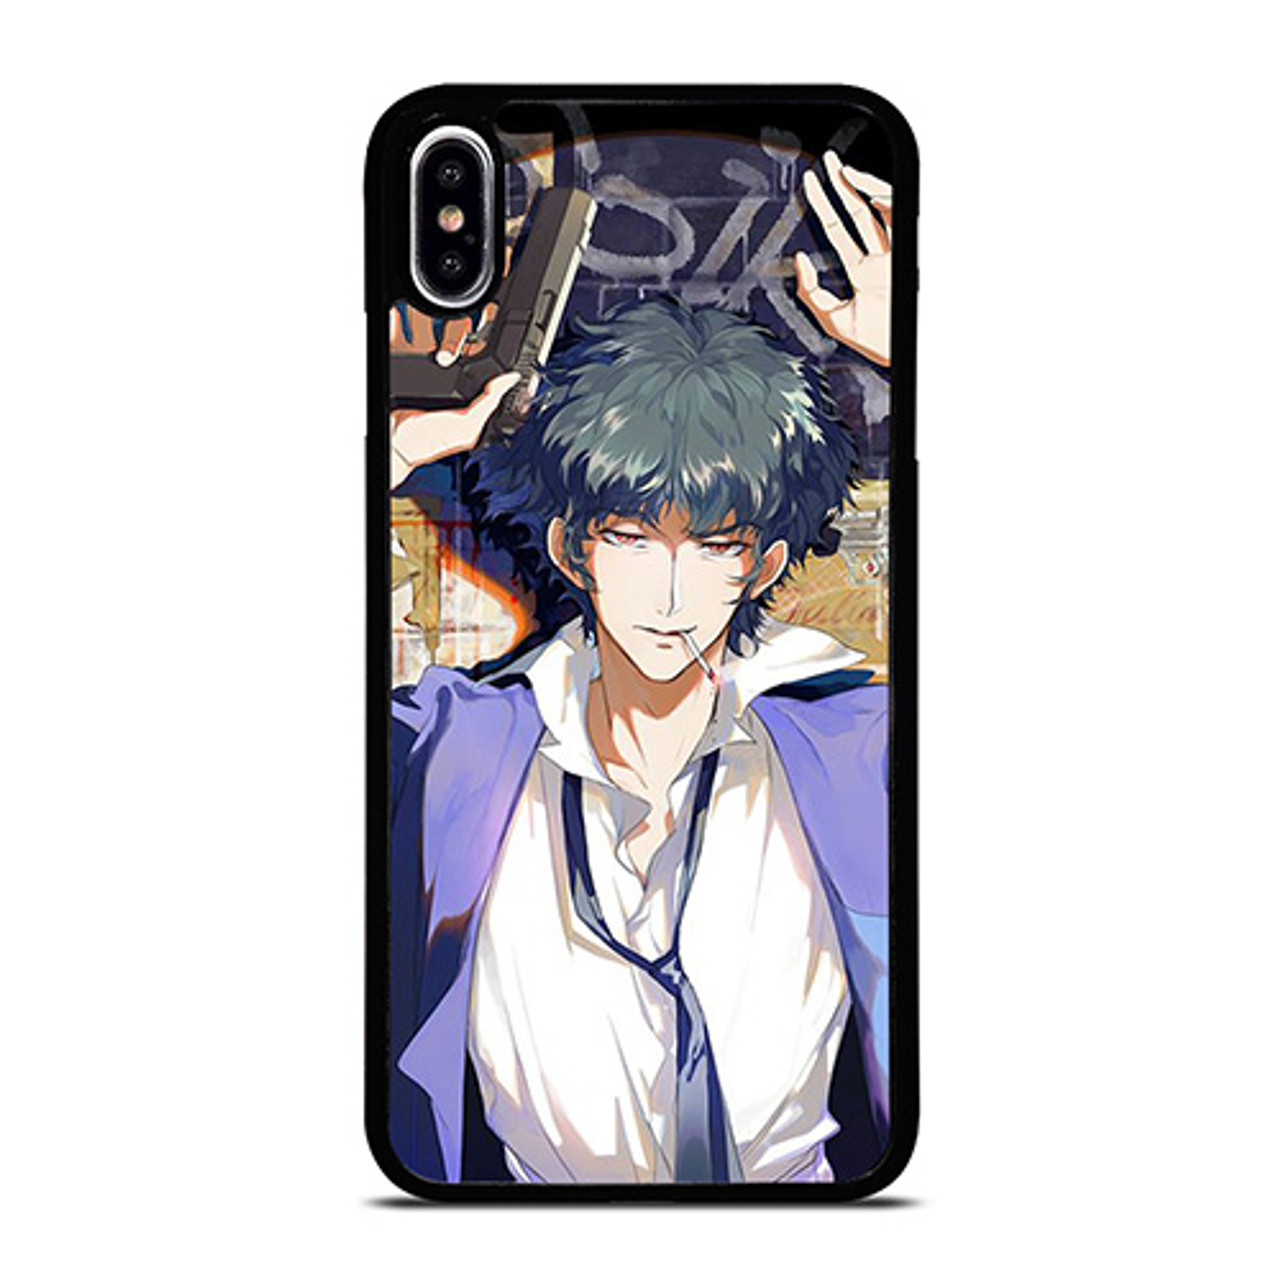 Melodrama angst Kwadrant SPIKE SPIEGEL COWBOY BEBOP iPhone XS Max Case Cover